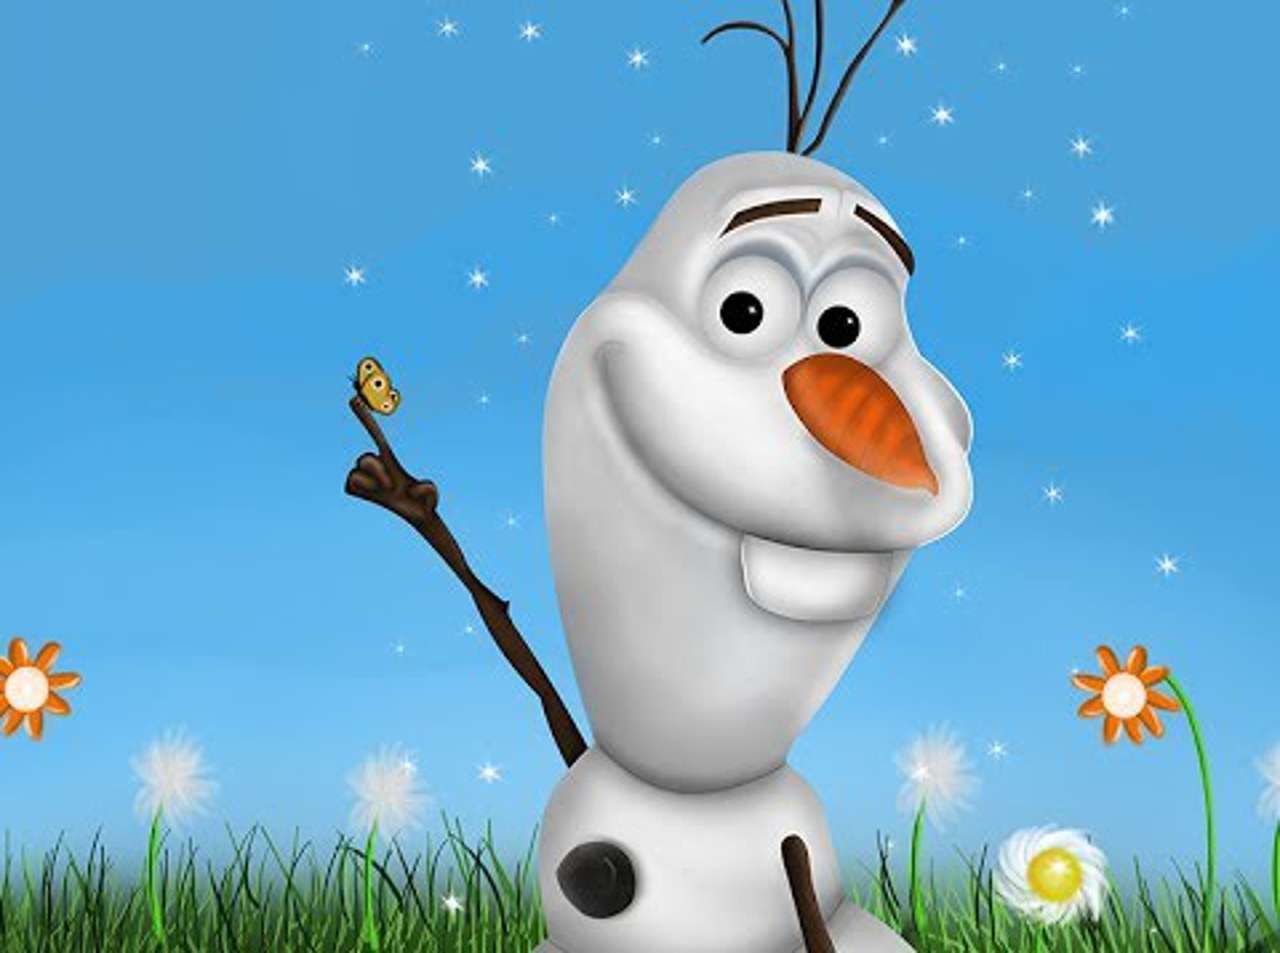 Olaf Frozen puzzle online from photo